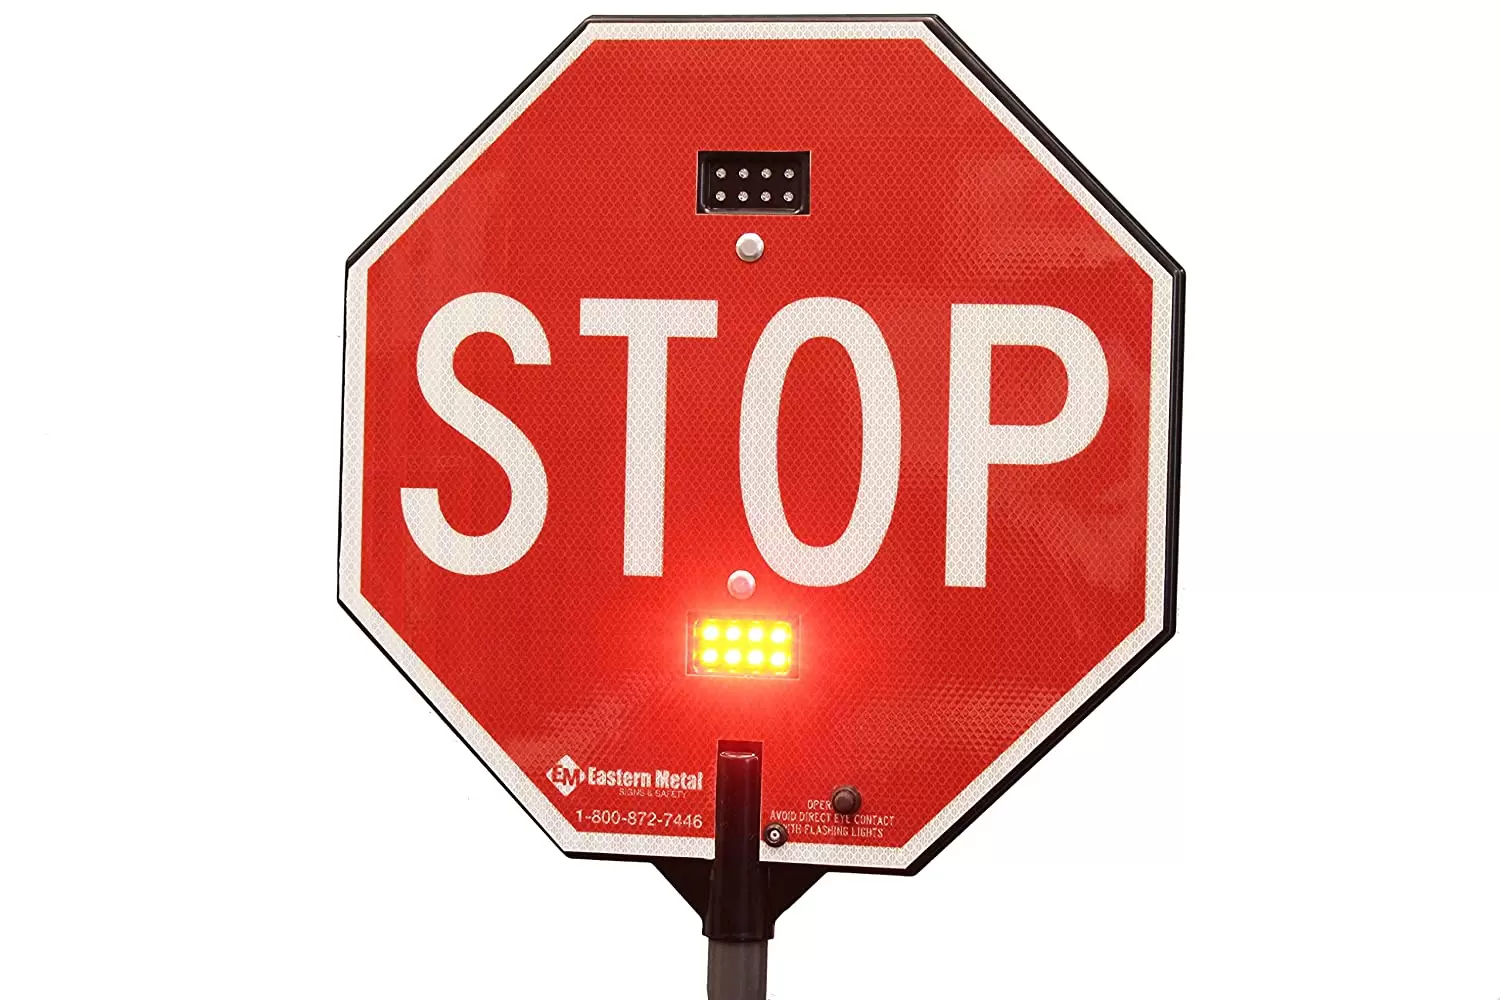 LED STOP STOP PADDLE